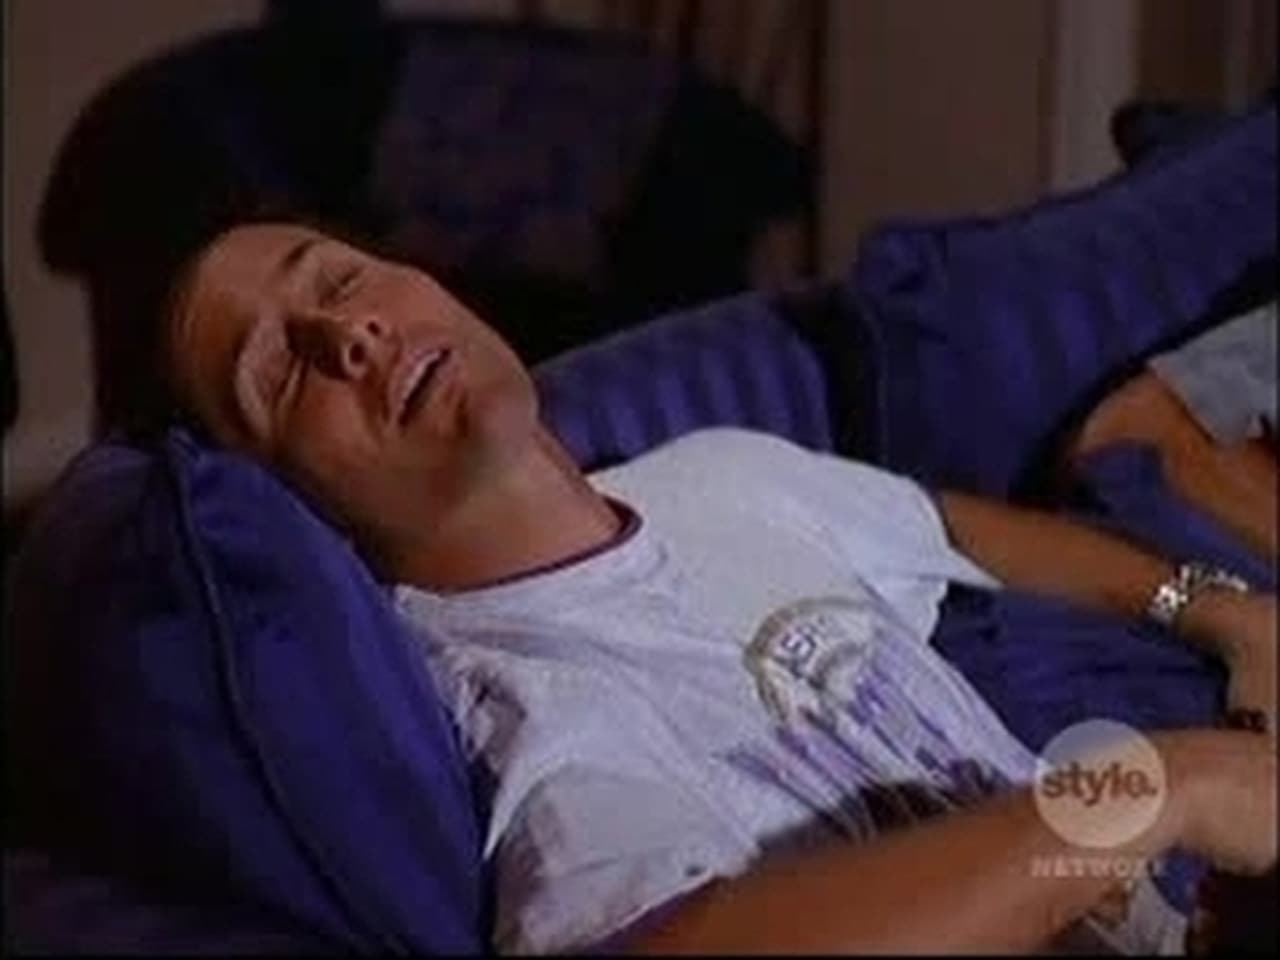 Melrose Place - Season 7 Episode 13 : The Night the Lights Went Out at Melrose